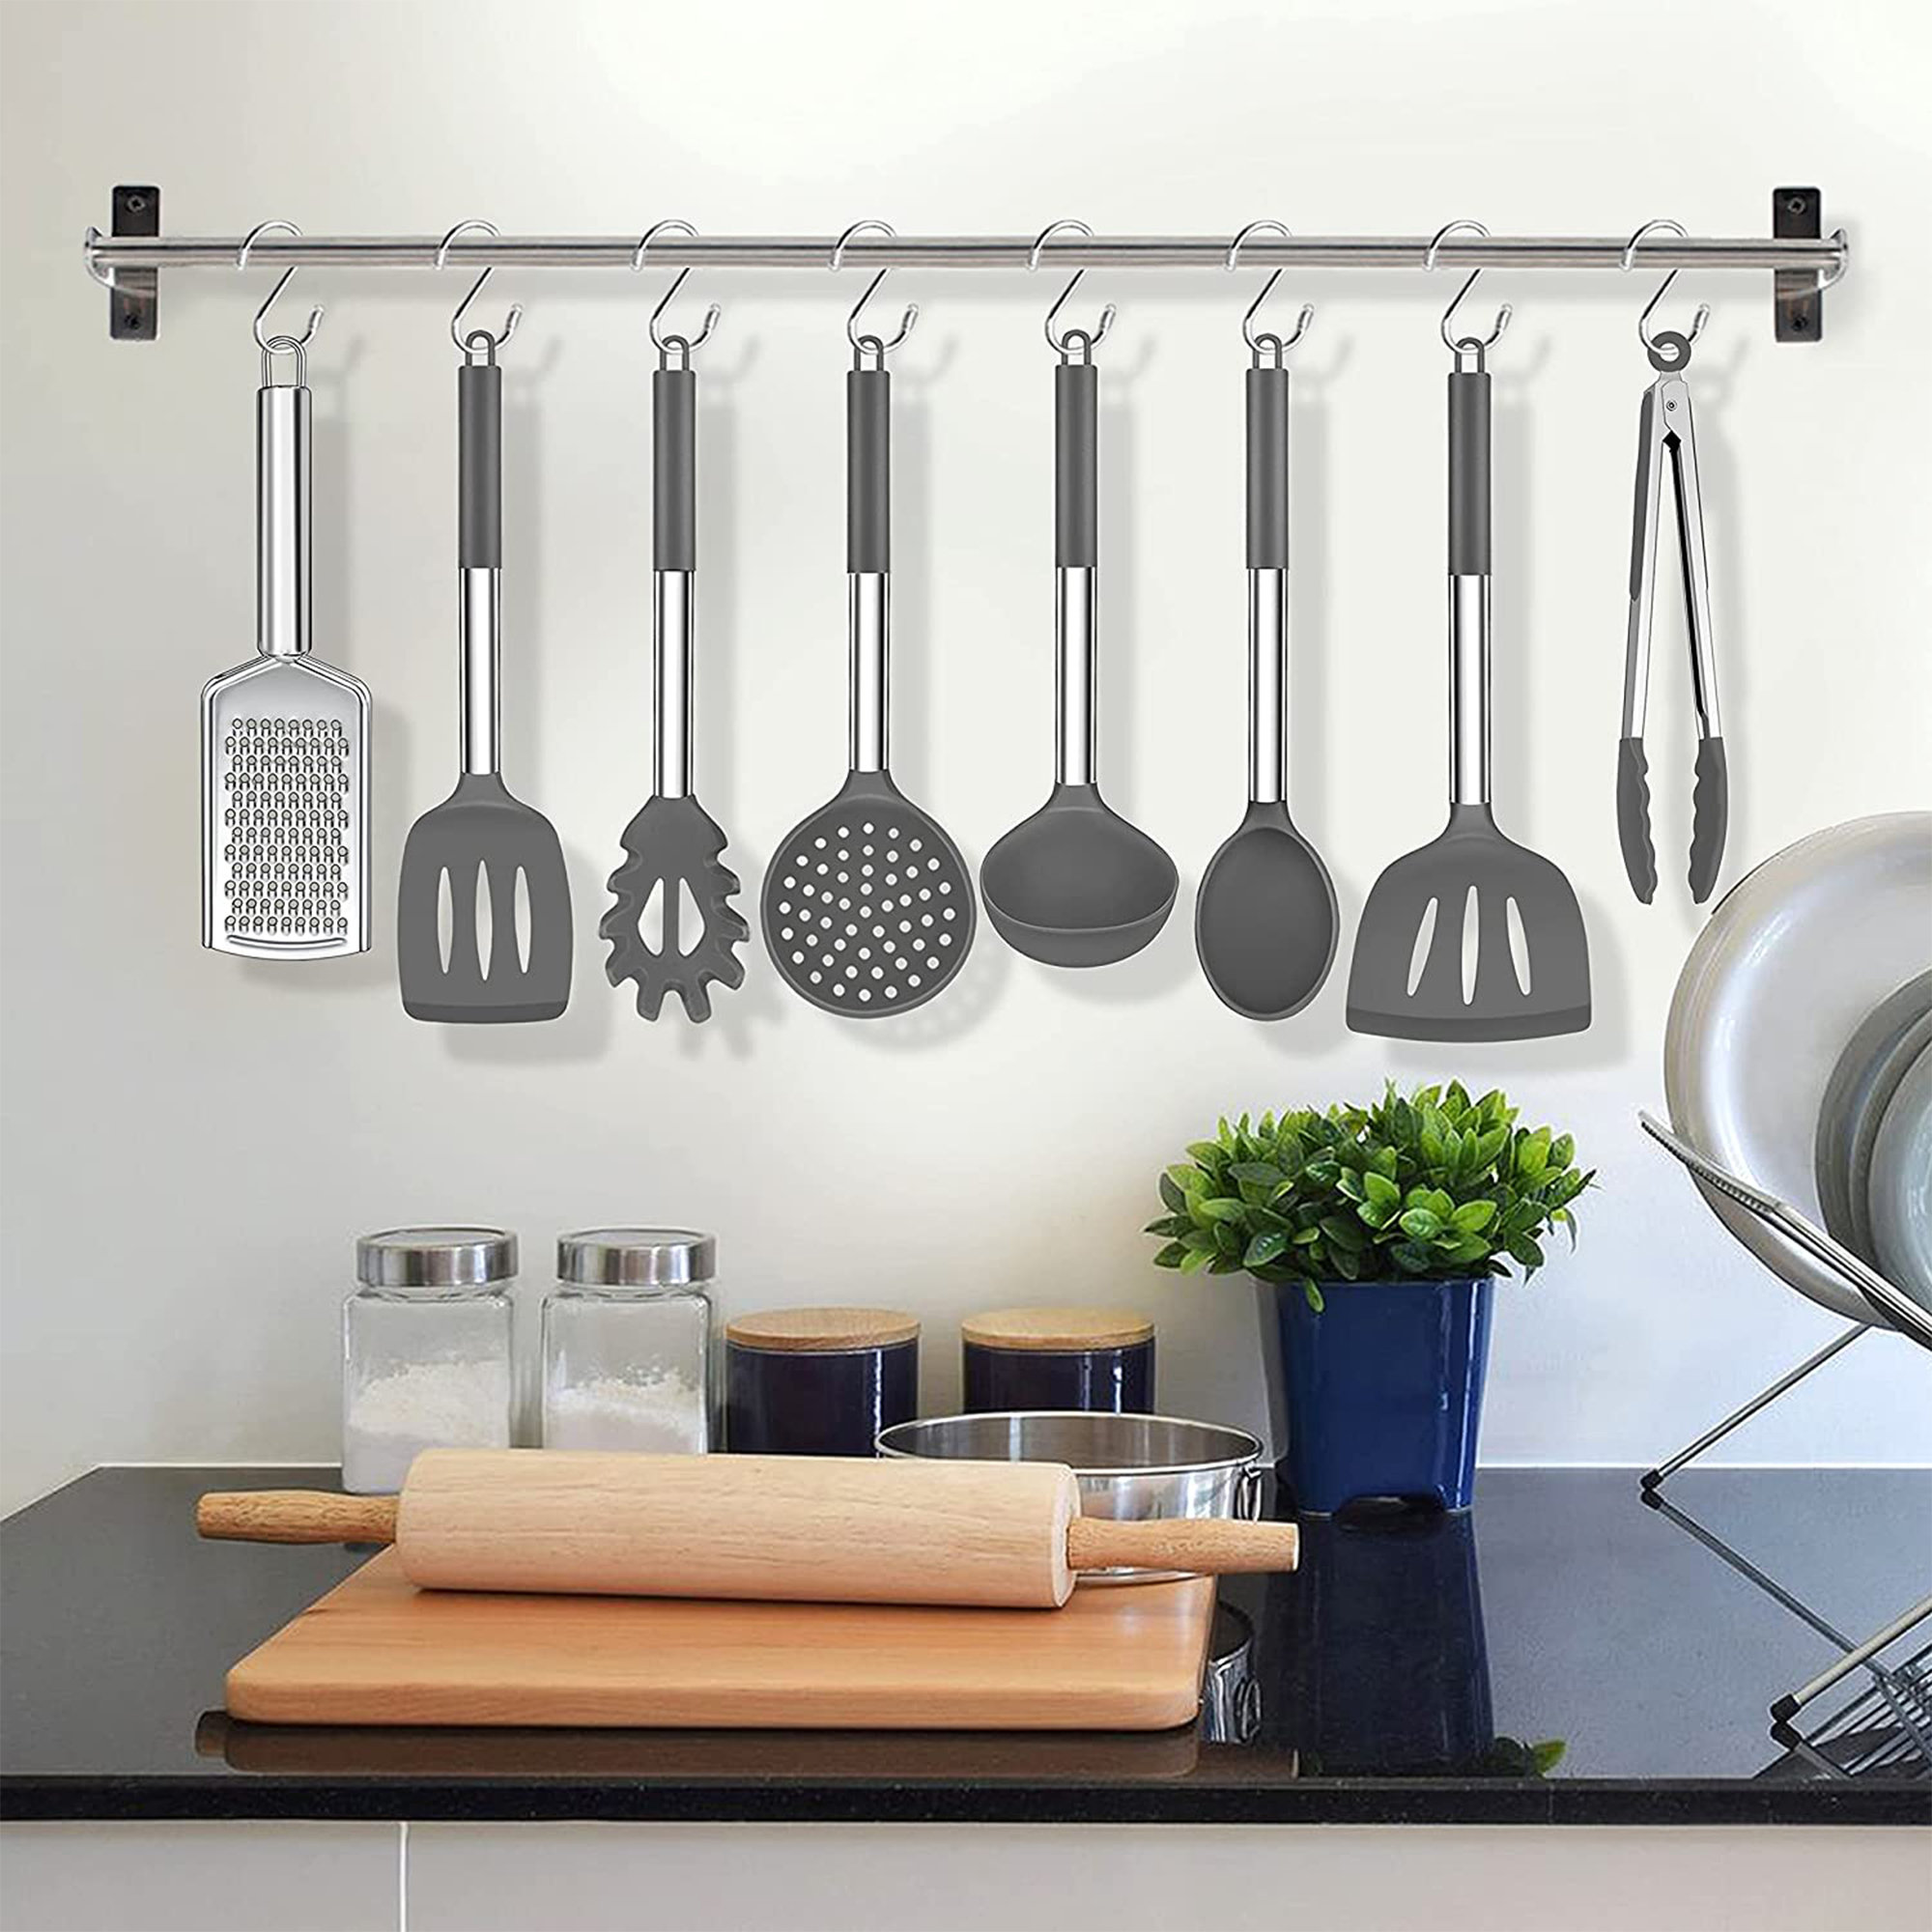 Kitchen Utensils Set 38 Pieces, Stainless Steel Cooking Utensils Set,  Kitchen Gadgets Cookware, Kitchen Tool Set with Utensil Holder Rack and  Hooks for Hanging Dishwasher Safe, DURABLE AND STYLISH DESIGN:, making it